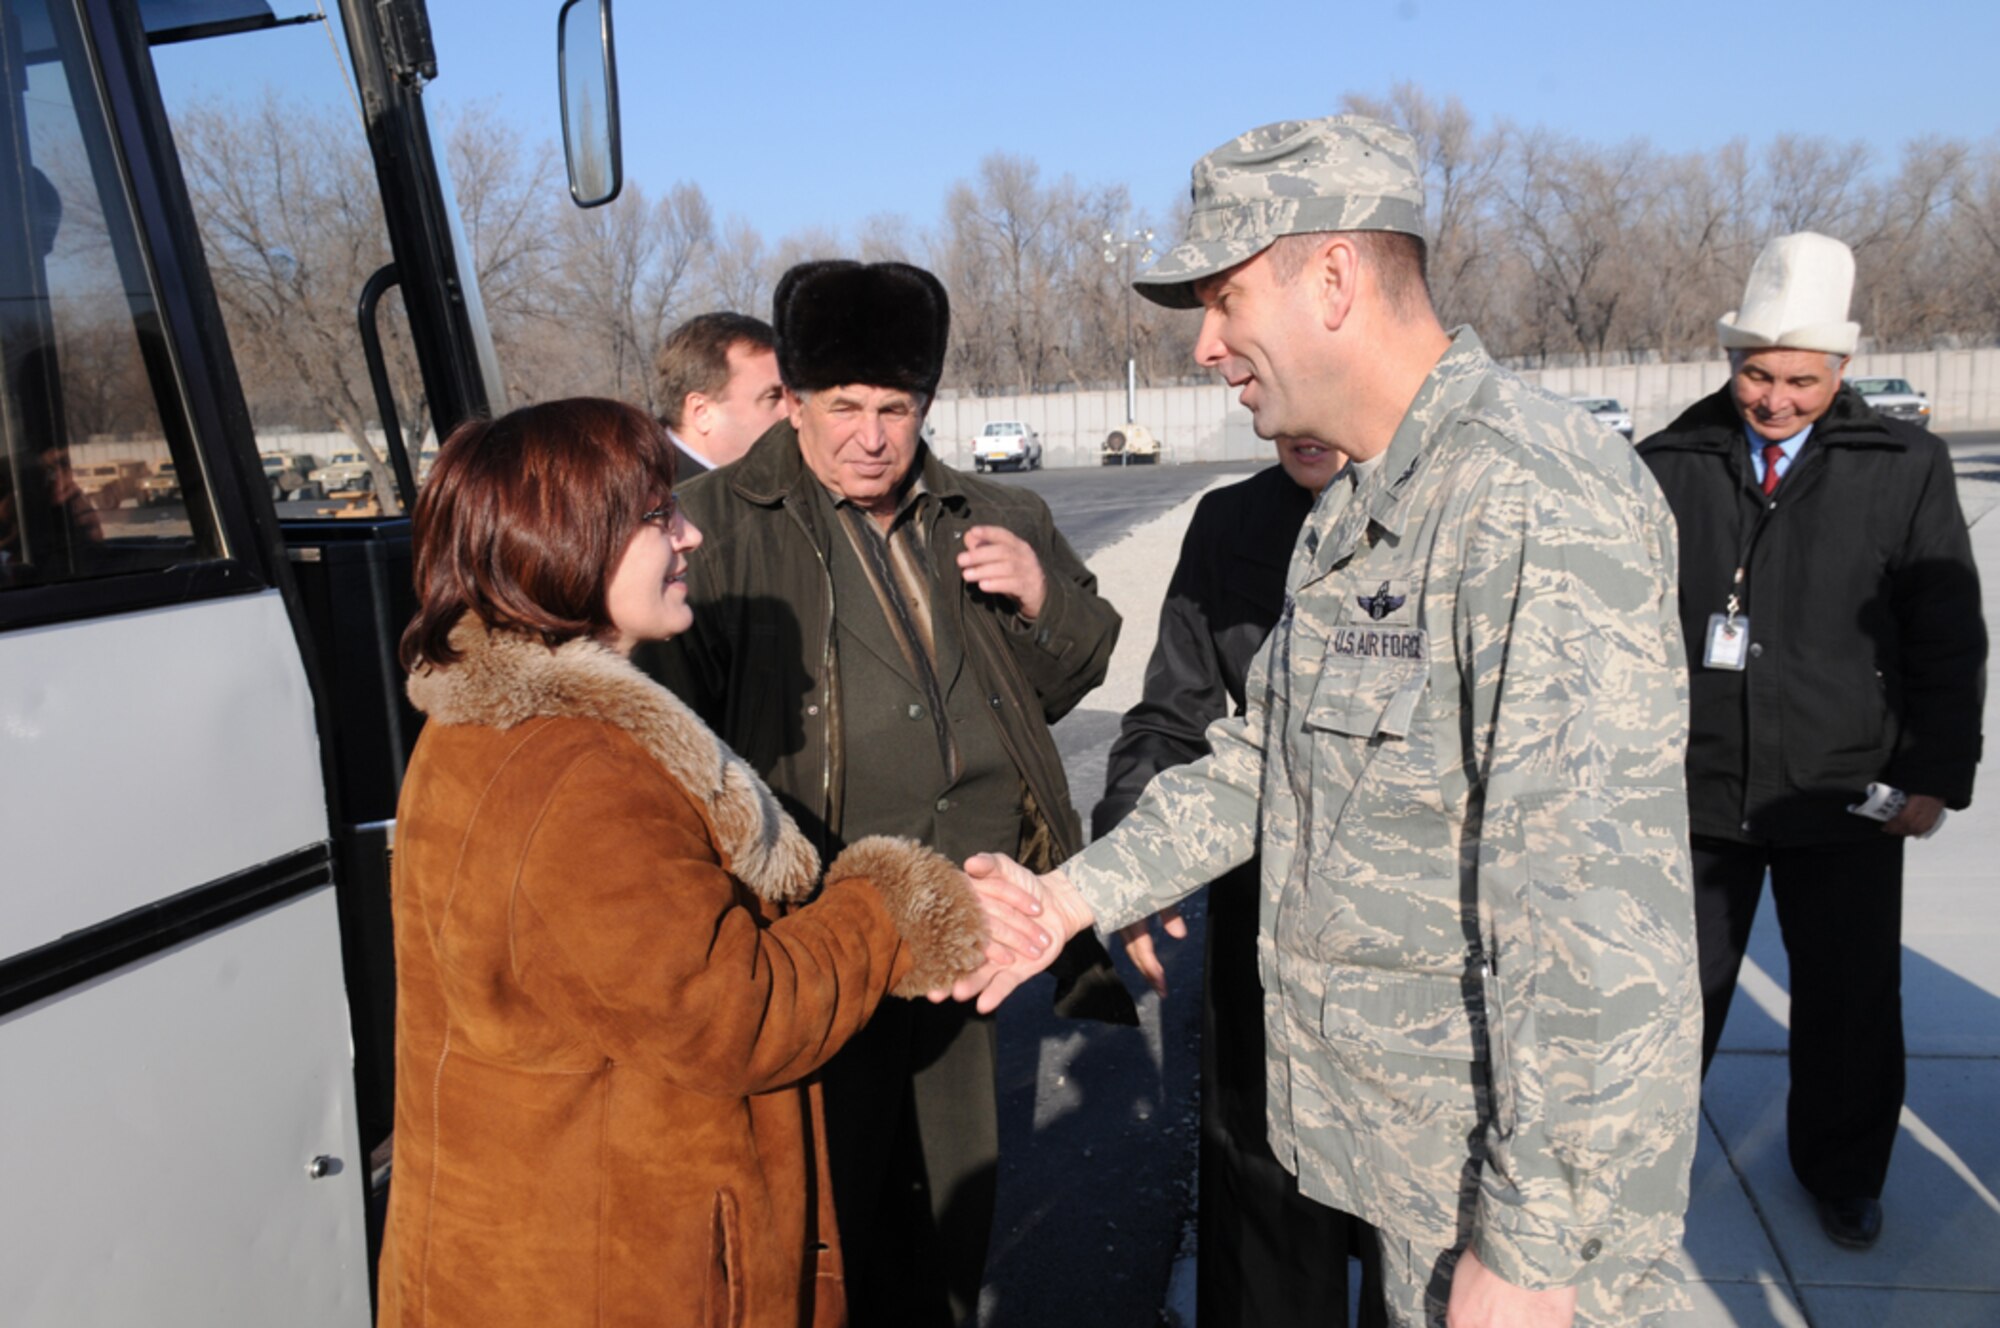 Col. Christopher Bence, 376th Air Expeditionary Wing commander, greets Magiyat Abakirova, chief accountant for Jany Pakhta village, as she and mayors and deputy mayors from local Kyrgyz villages arrive at Manas for a tour of the base and lunch with wing leadership, Dec. 10. The visit provided an opportunity to strengthen friendships and discuss issues affecting the local villages that the base can assist with. (Air Force photo / Senior Airman Ruth Holcomb) 	